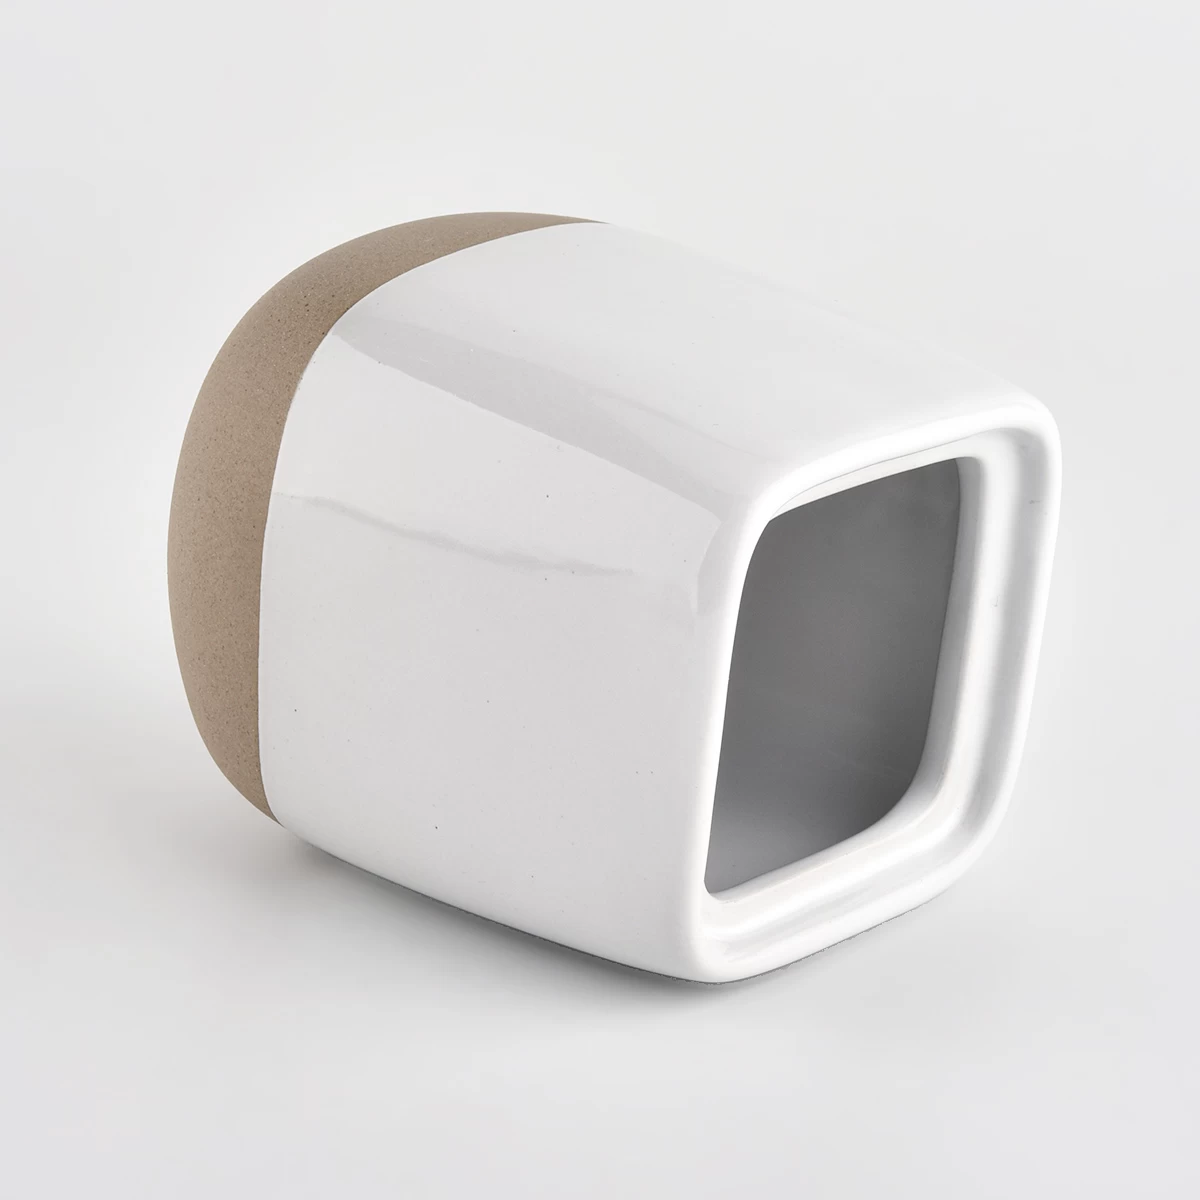 glossy white ceramic vessel with square lid